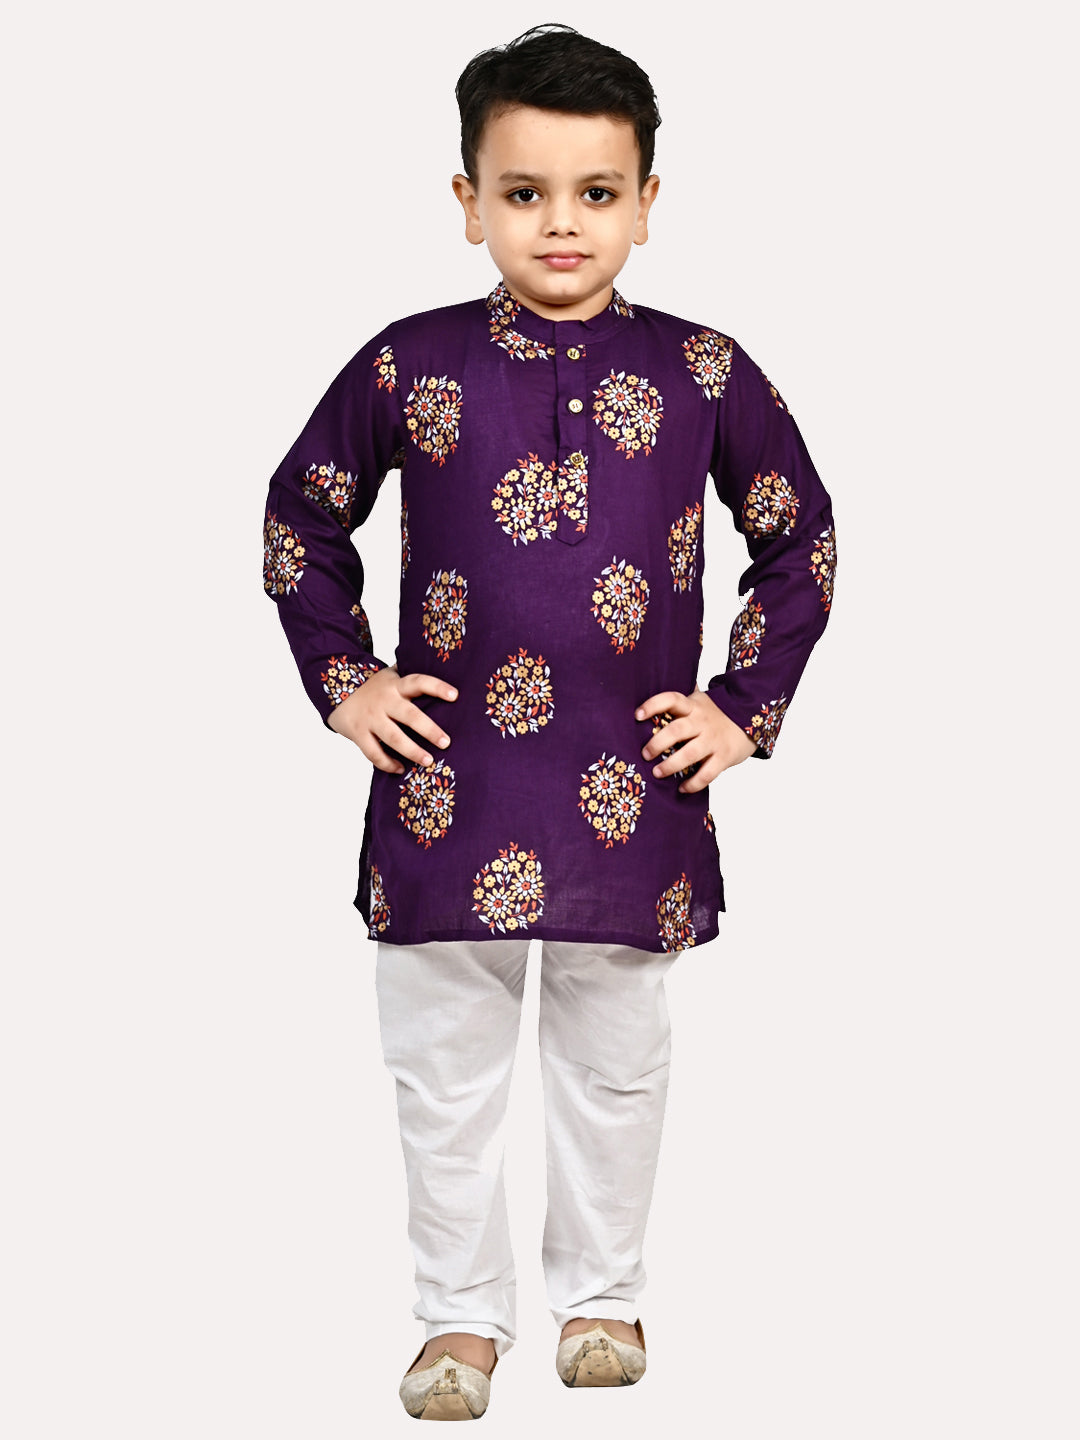 Buy Stylish and Ethnic Wear Cotton Kurta Dhoti (White) Traditional Dress  Set for Baby Boys, Front Open with Dori Pattern, Full Sleeves, and Round  neck, Ideal for All Festivals (3-6 months) at